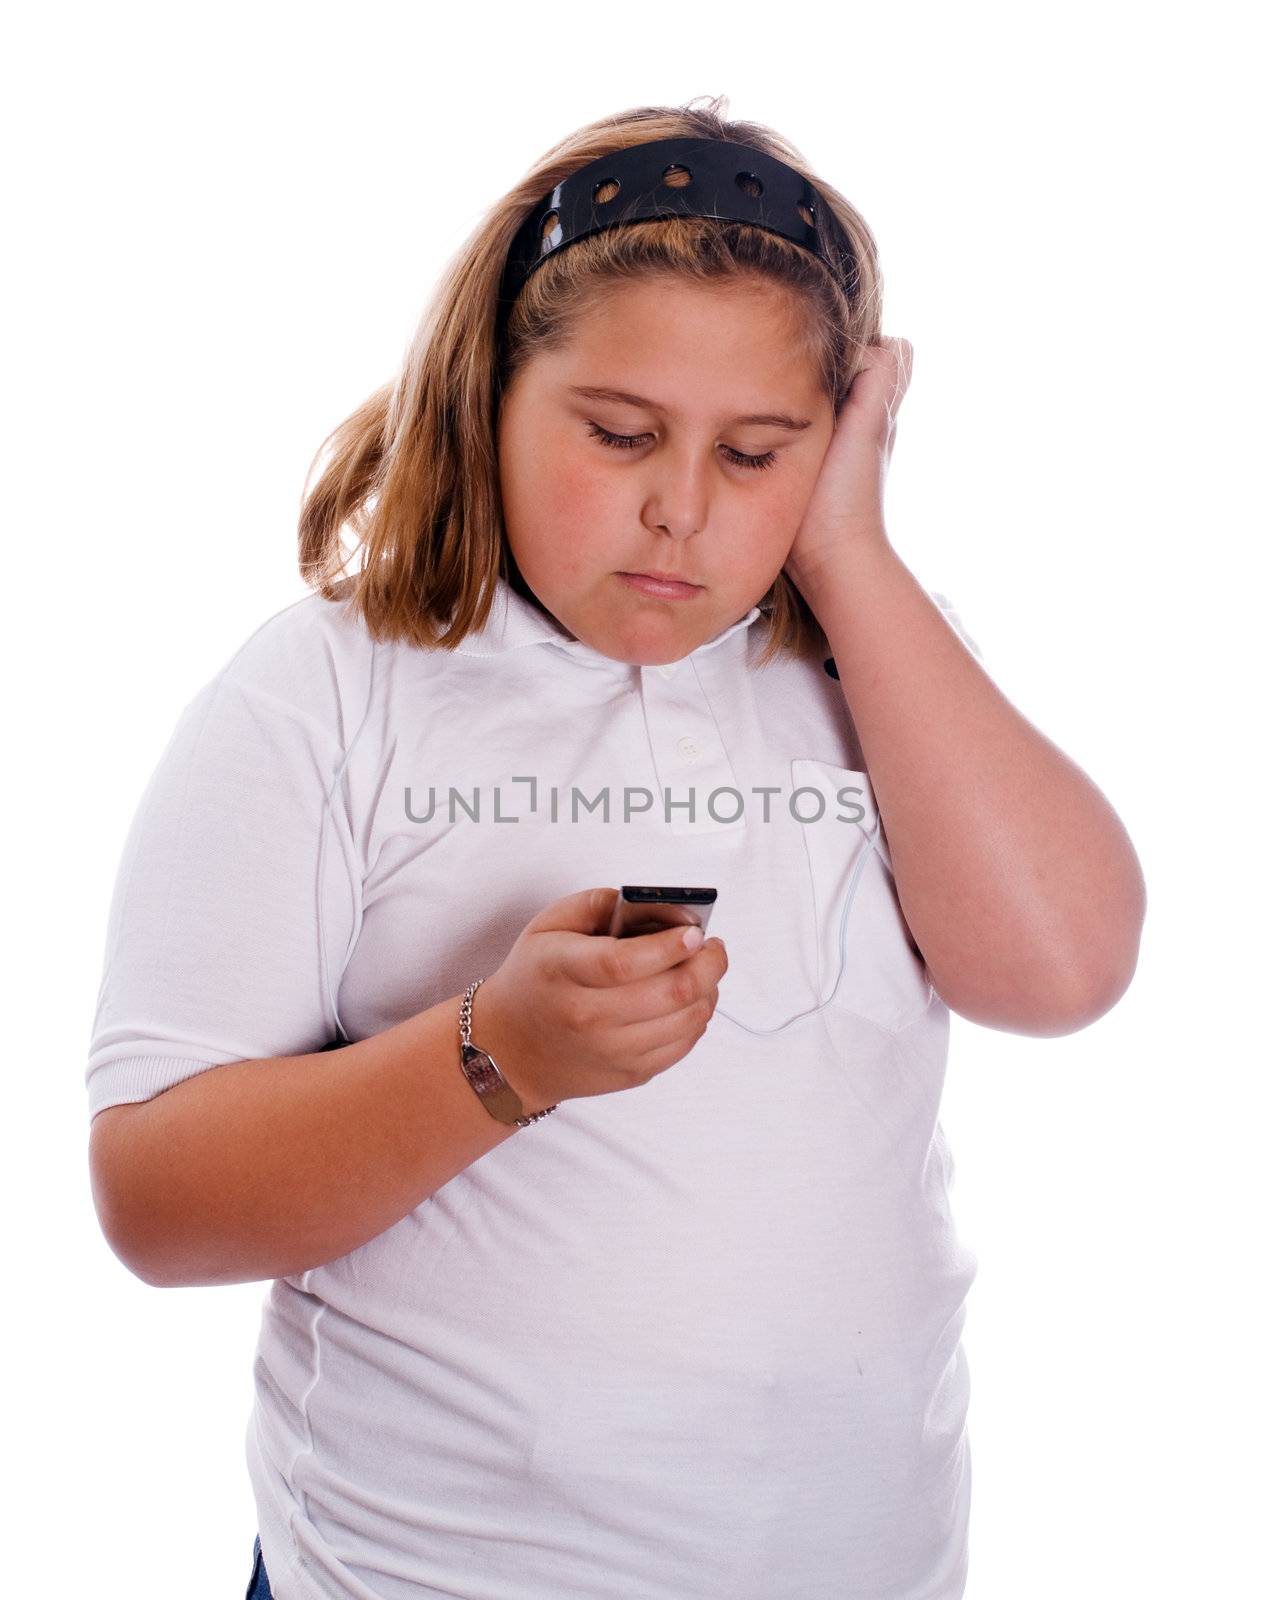 A young girl listening to her MP3 player isolated against a white background